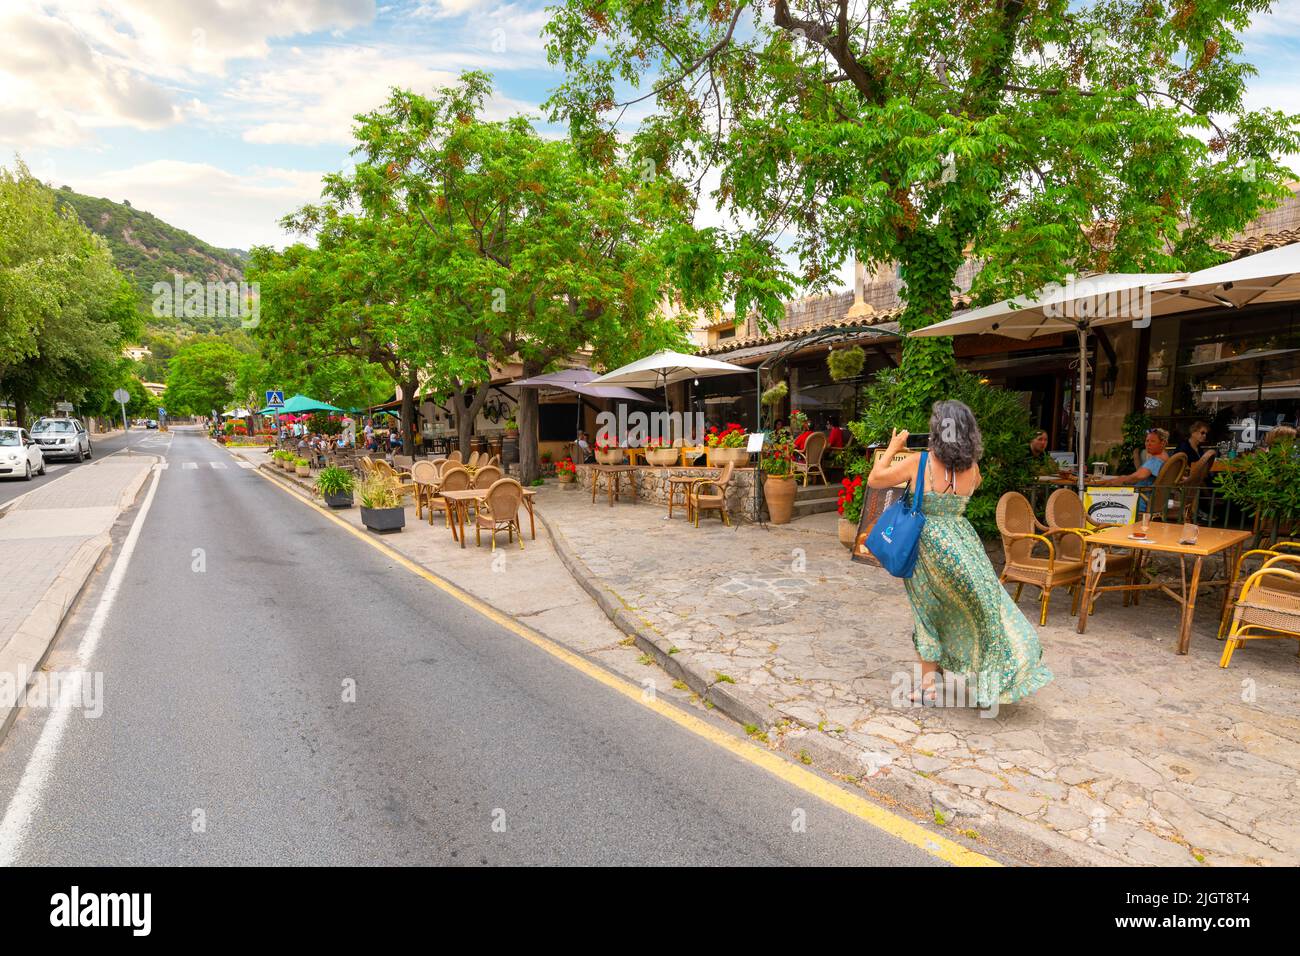 One of the many picturesque tree lined streets of shops and cafes in the hilltop village of Valldemossa, Spain, on the island of Mallorca, Spain. Stock Photo